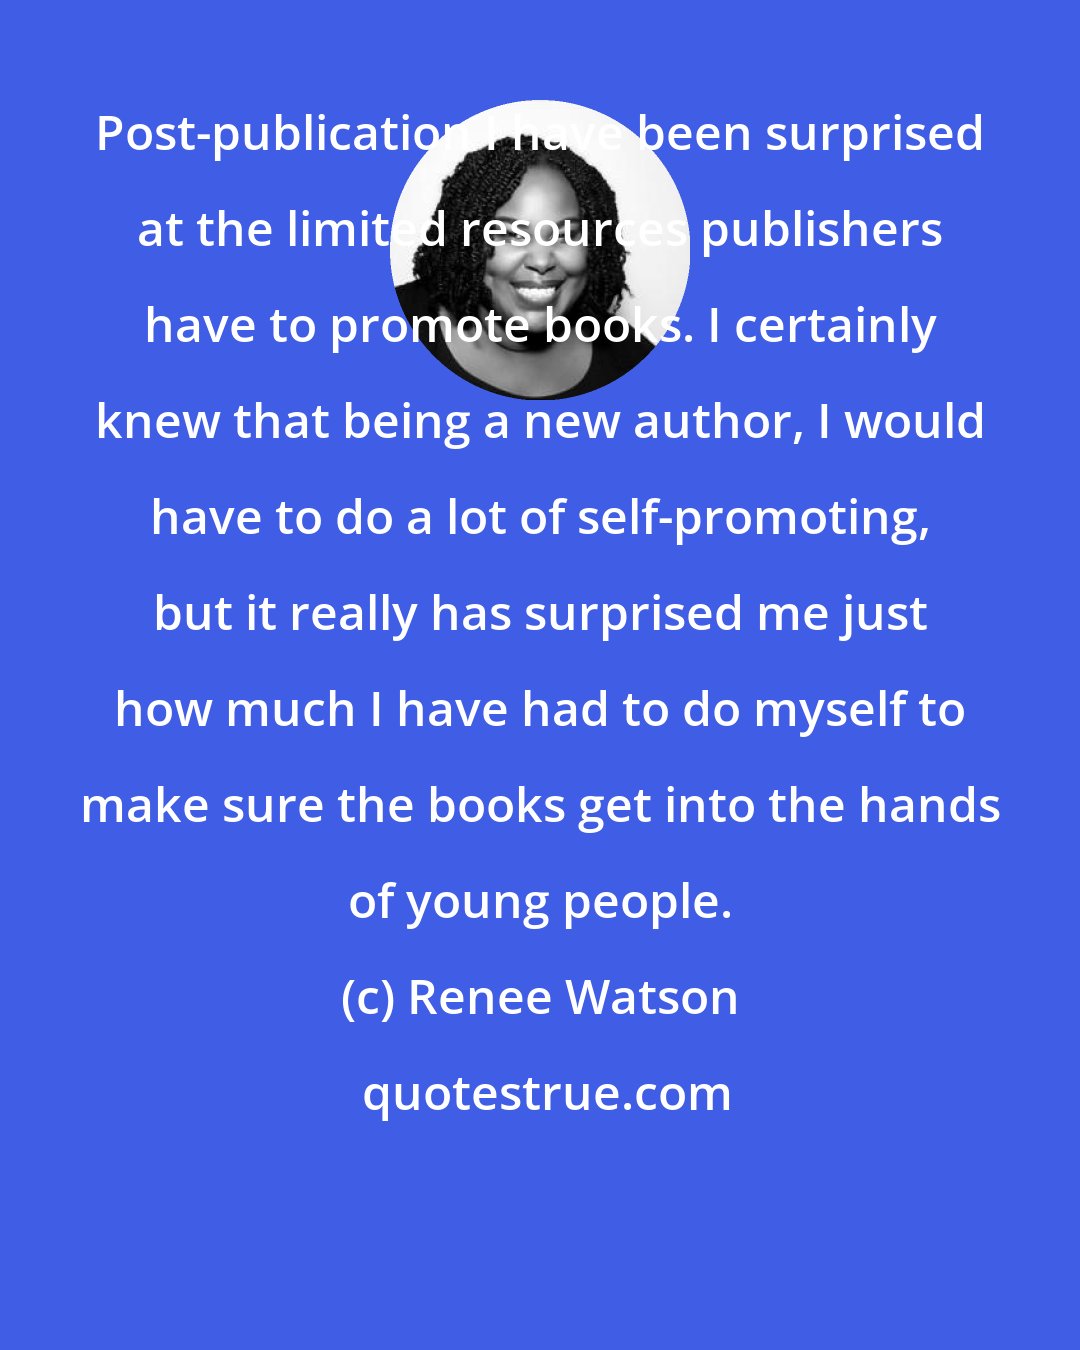 Renee Watson: Post-publication I have been surprised at the limited resources publishers have to promote books. I certainly knew that being a new author, I would have to do a lot of self-promoting, but it really has surprised me just how much I have had to do myself to make sure the books get into the hands of young people.